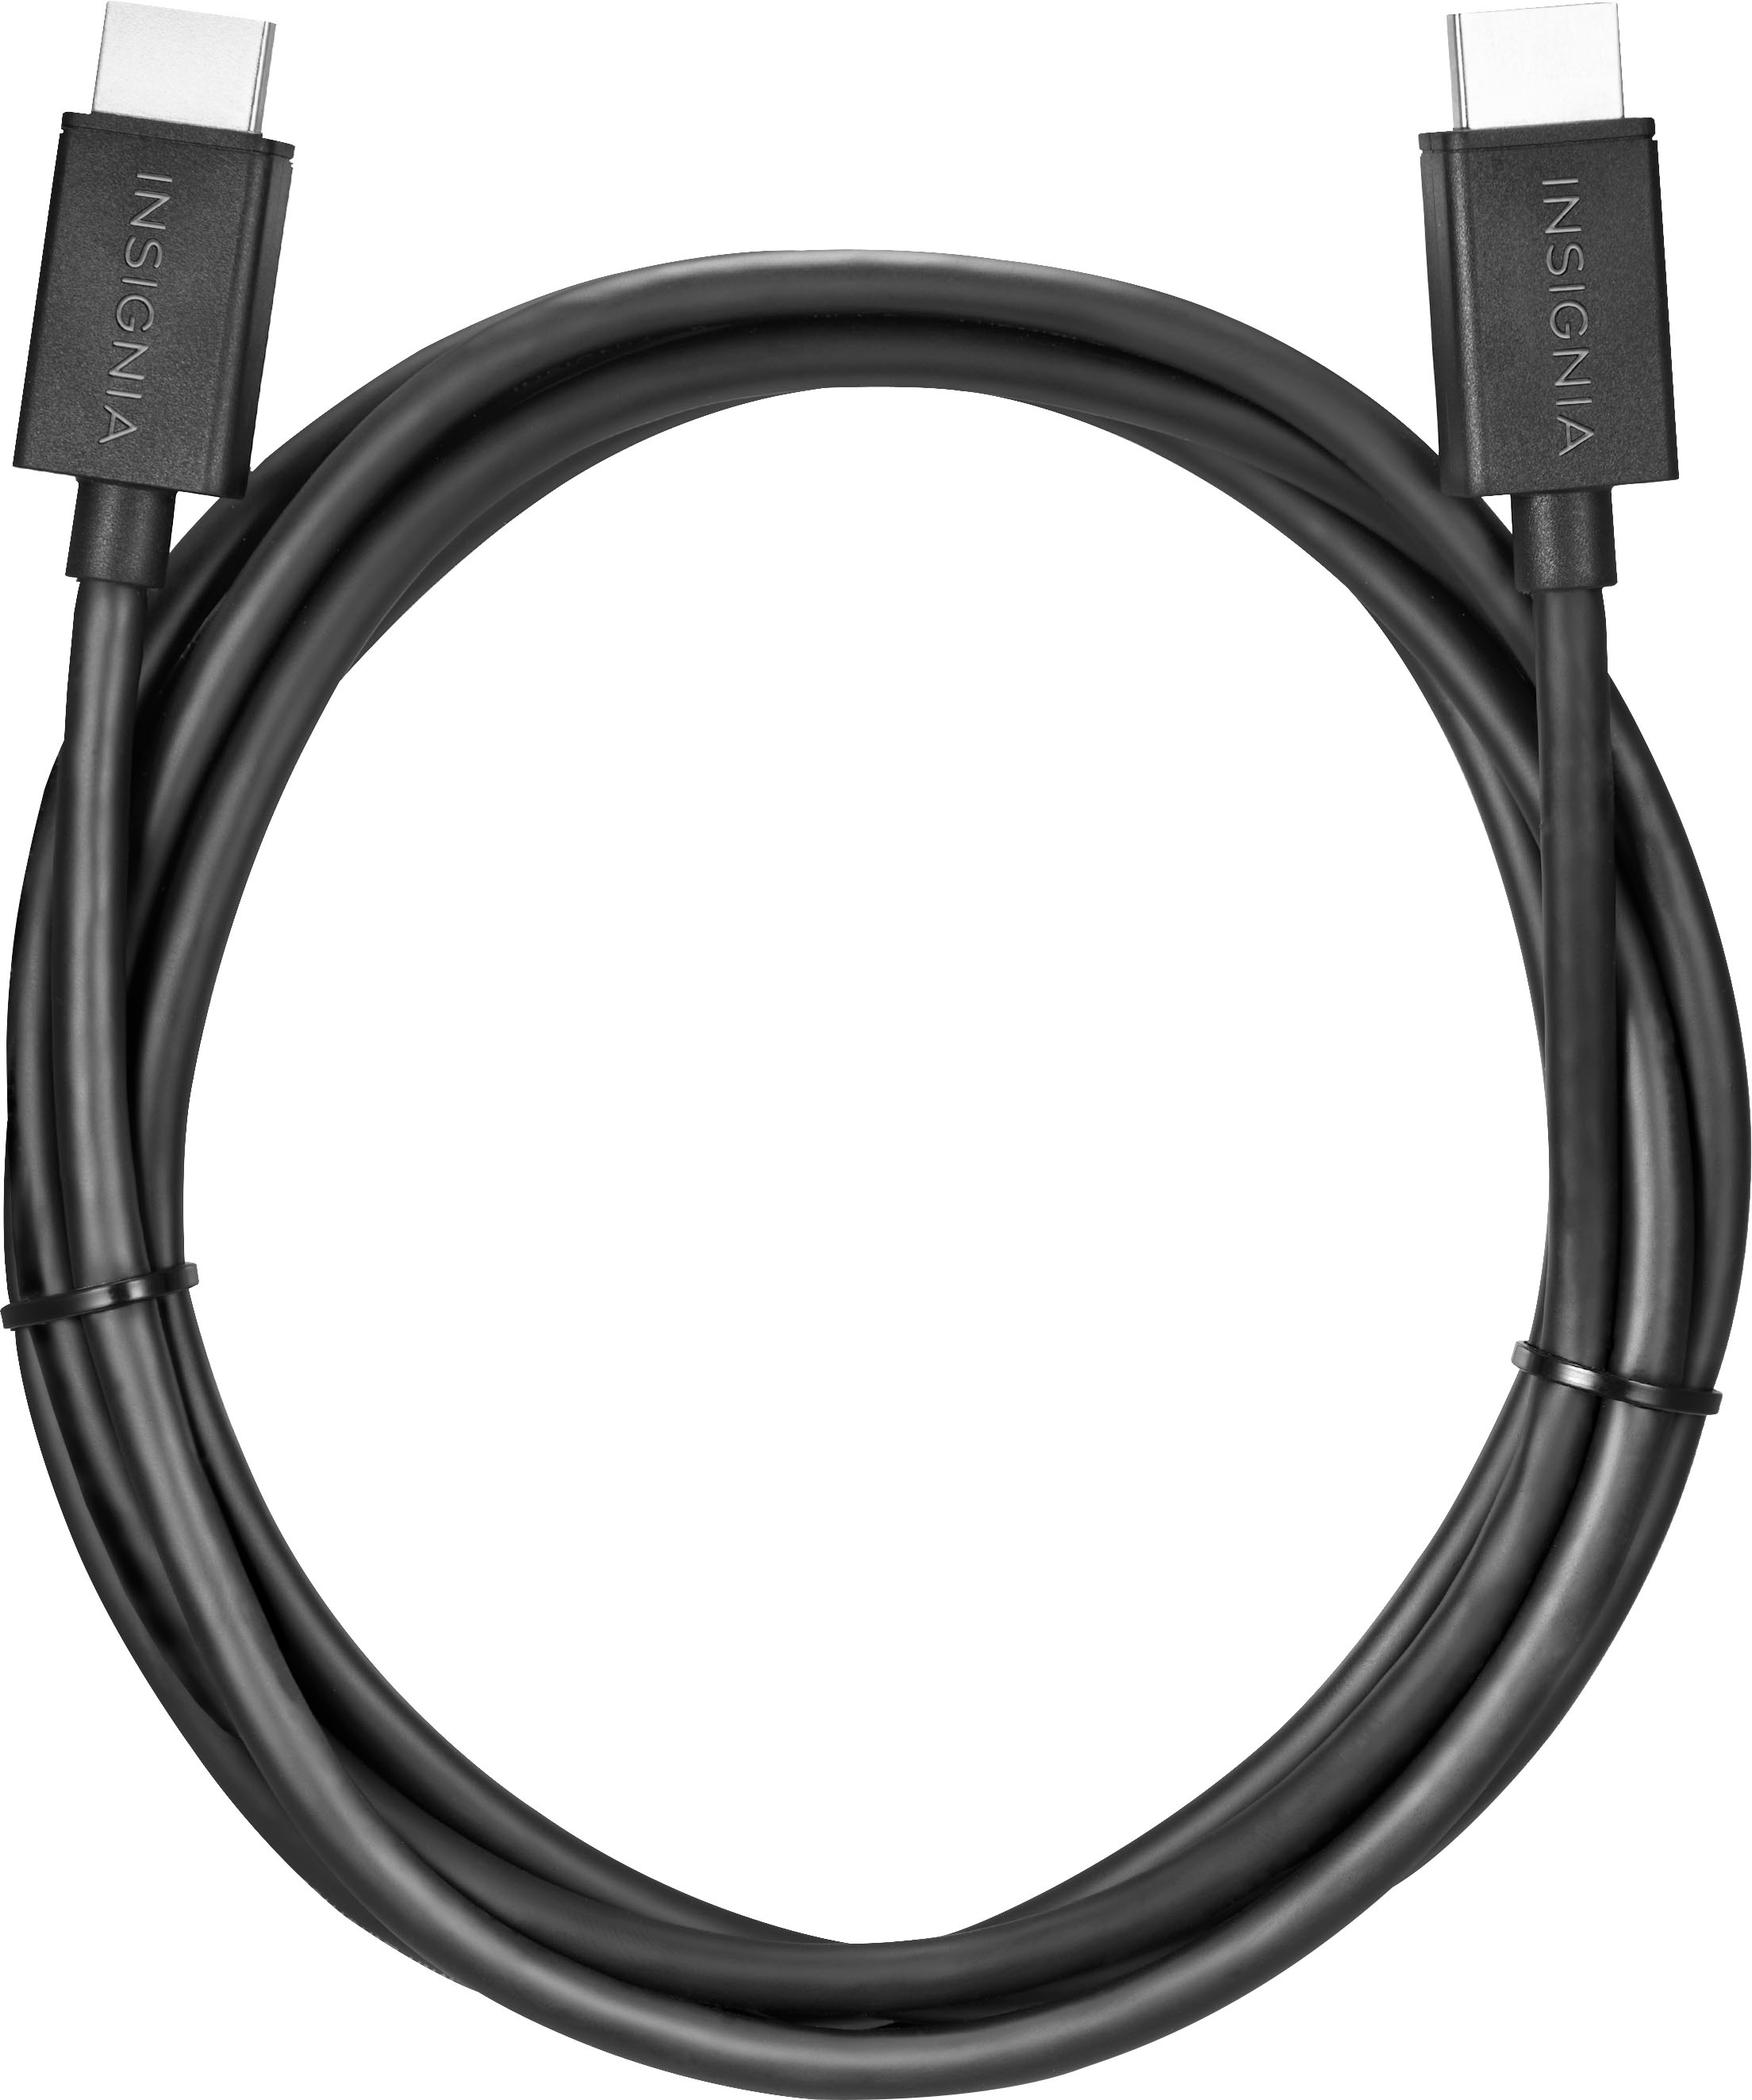 Insignia™ 8' Micro HDMI Cable to HDMI Black NS-PG08591 - Best